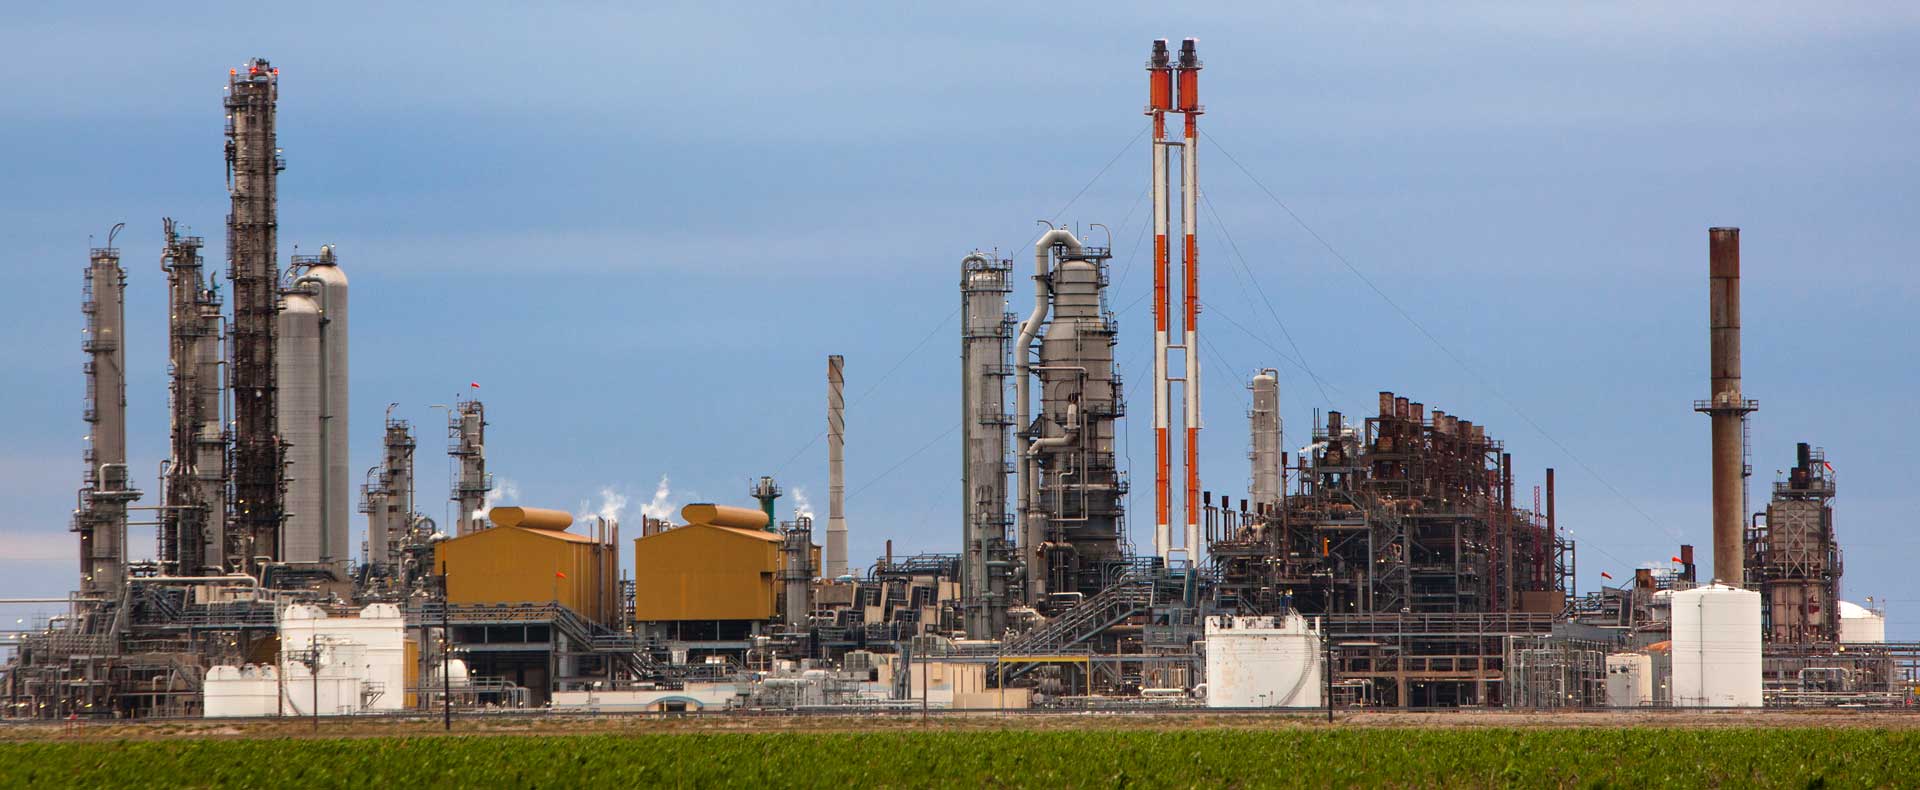 LyondellBasell Corpus Christi Complex Expansion Complete